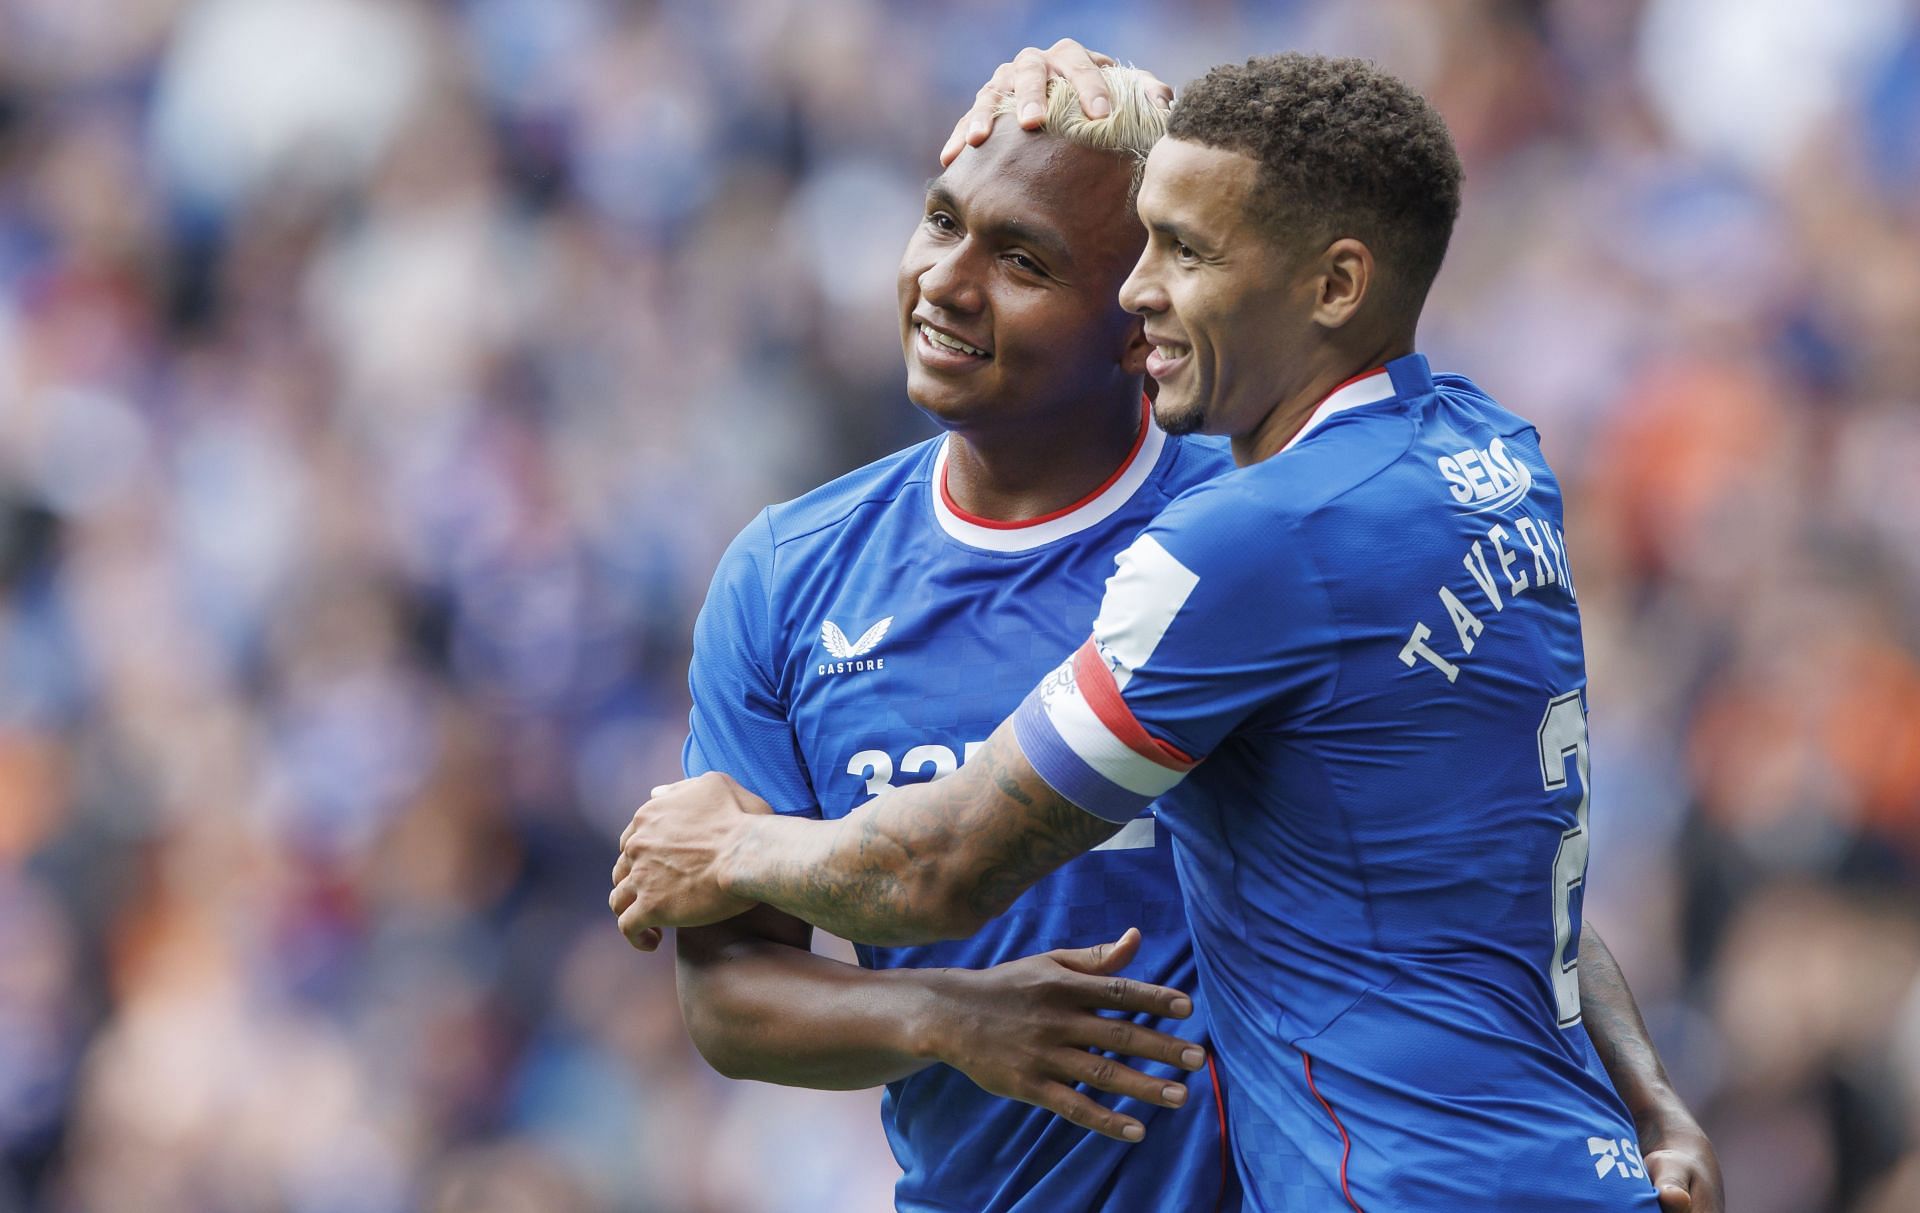 Rangers need to overcome a two-goal deficit against Union Saint-Gilloise on Tuesday